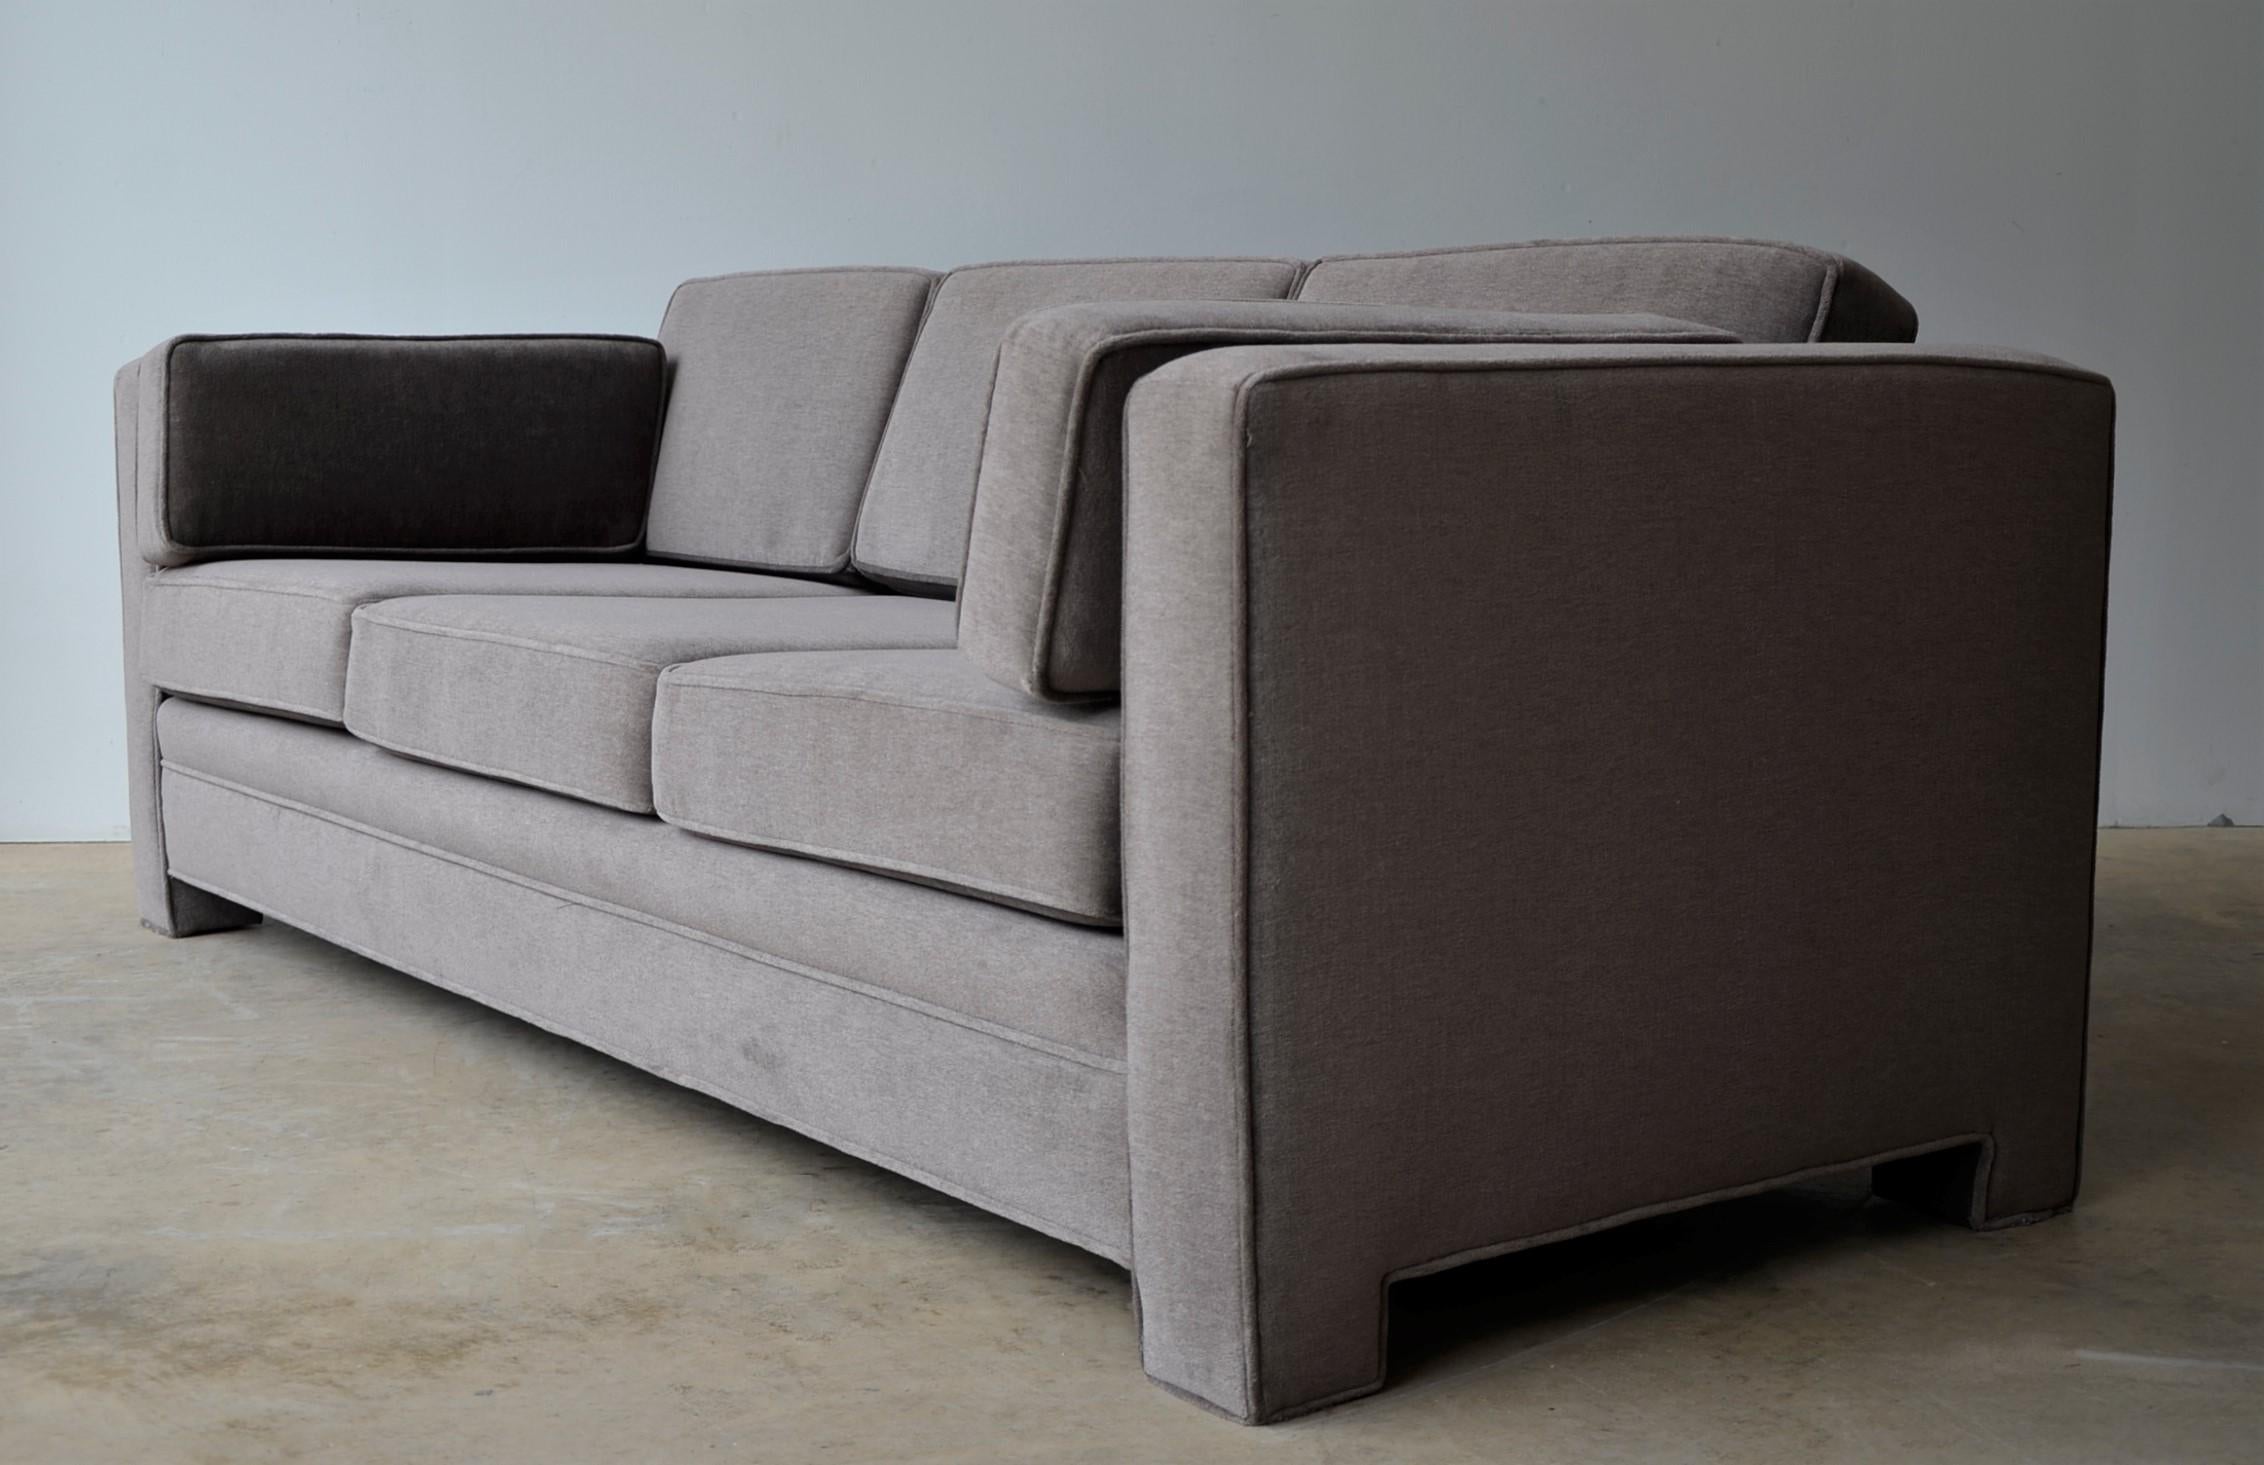 Offered is a Mid-Century Modern Milo Baughman style newly upholstered mohair wool tuxedo sofa in a warm gray or mink brown color way. This piece is a three-seat sofa with three-seat cushions and three back cushions and two armrest cushions. The sofa